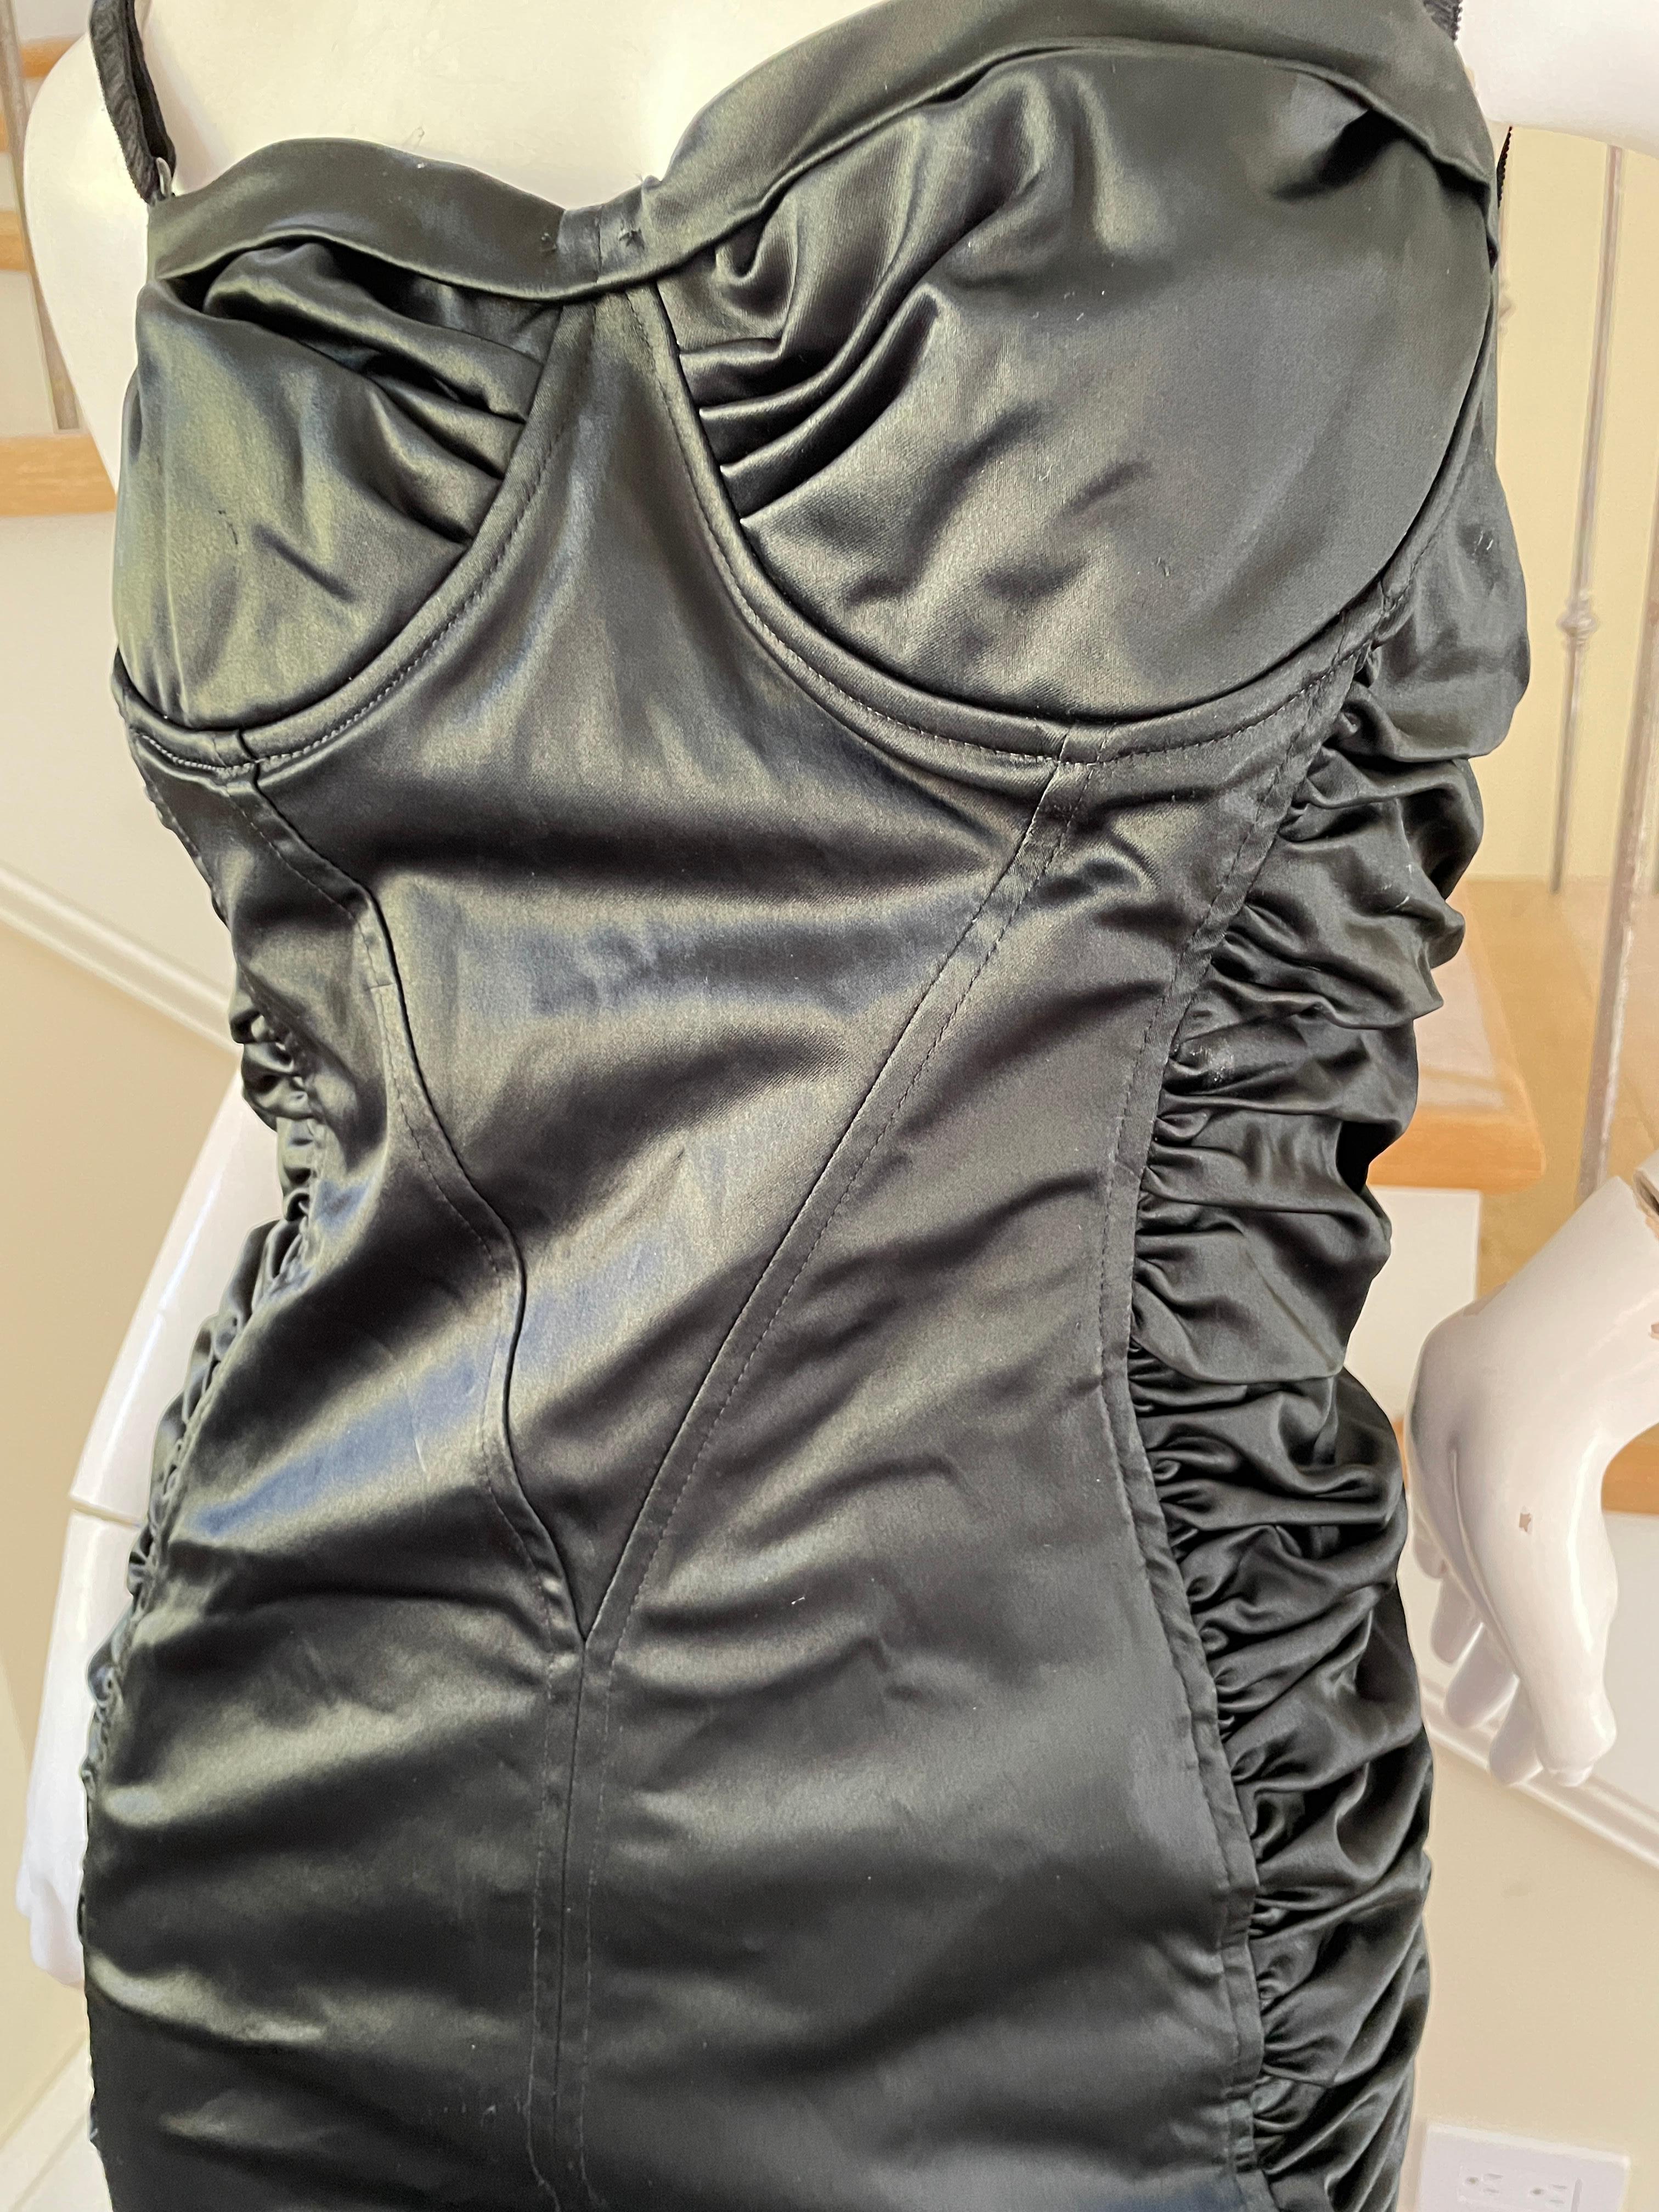 D&G by Dolce & Gabbana Vintage Black Ruched Cocktail Dress with Underwire Bra In Excellent Condition For Sale In Cloverdale, CA